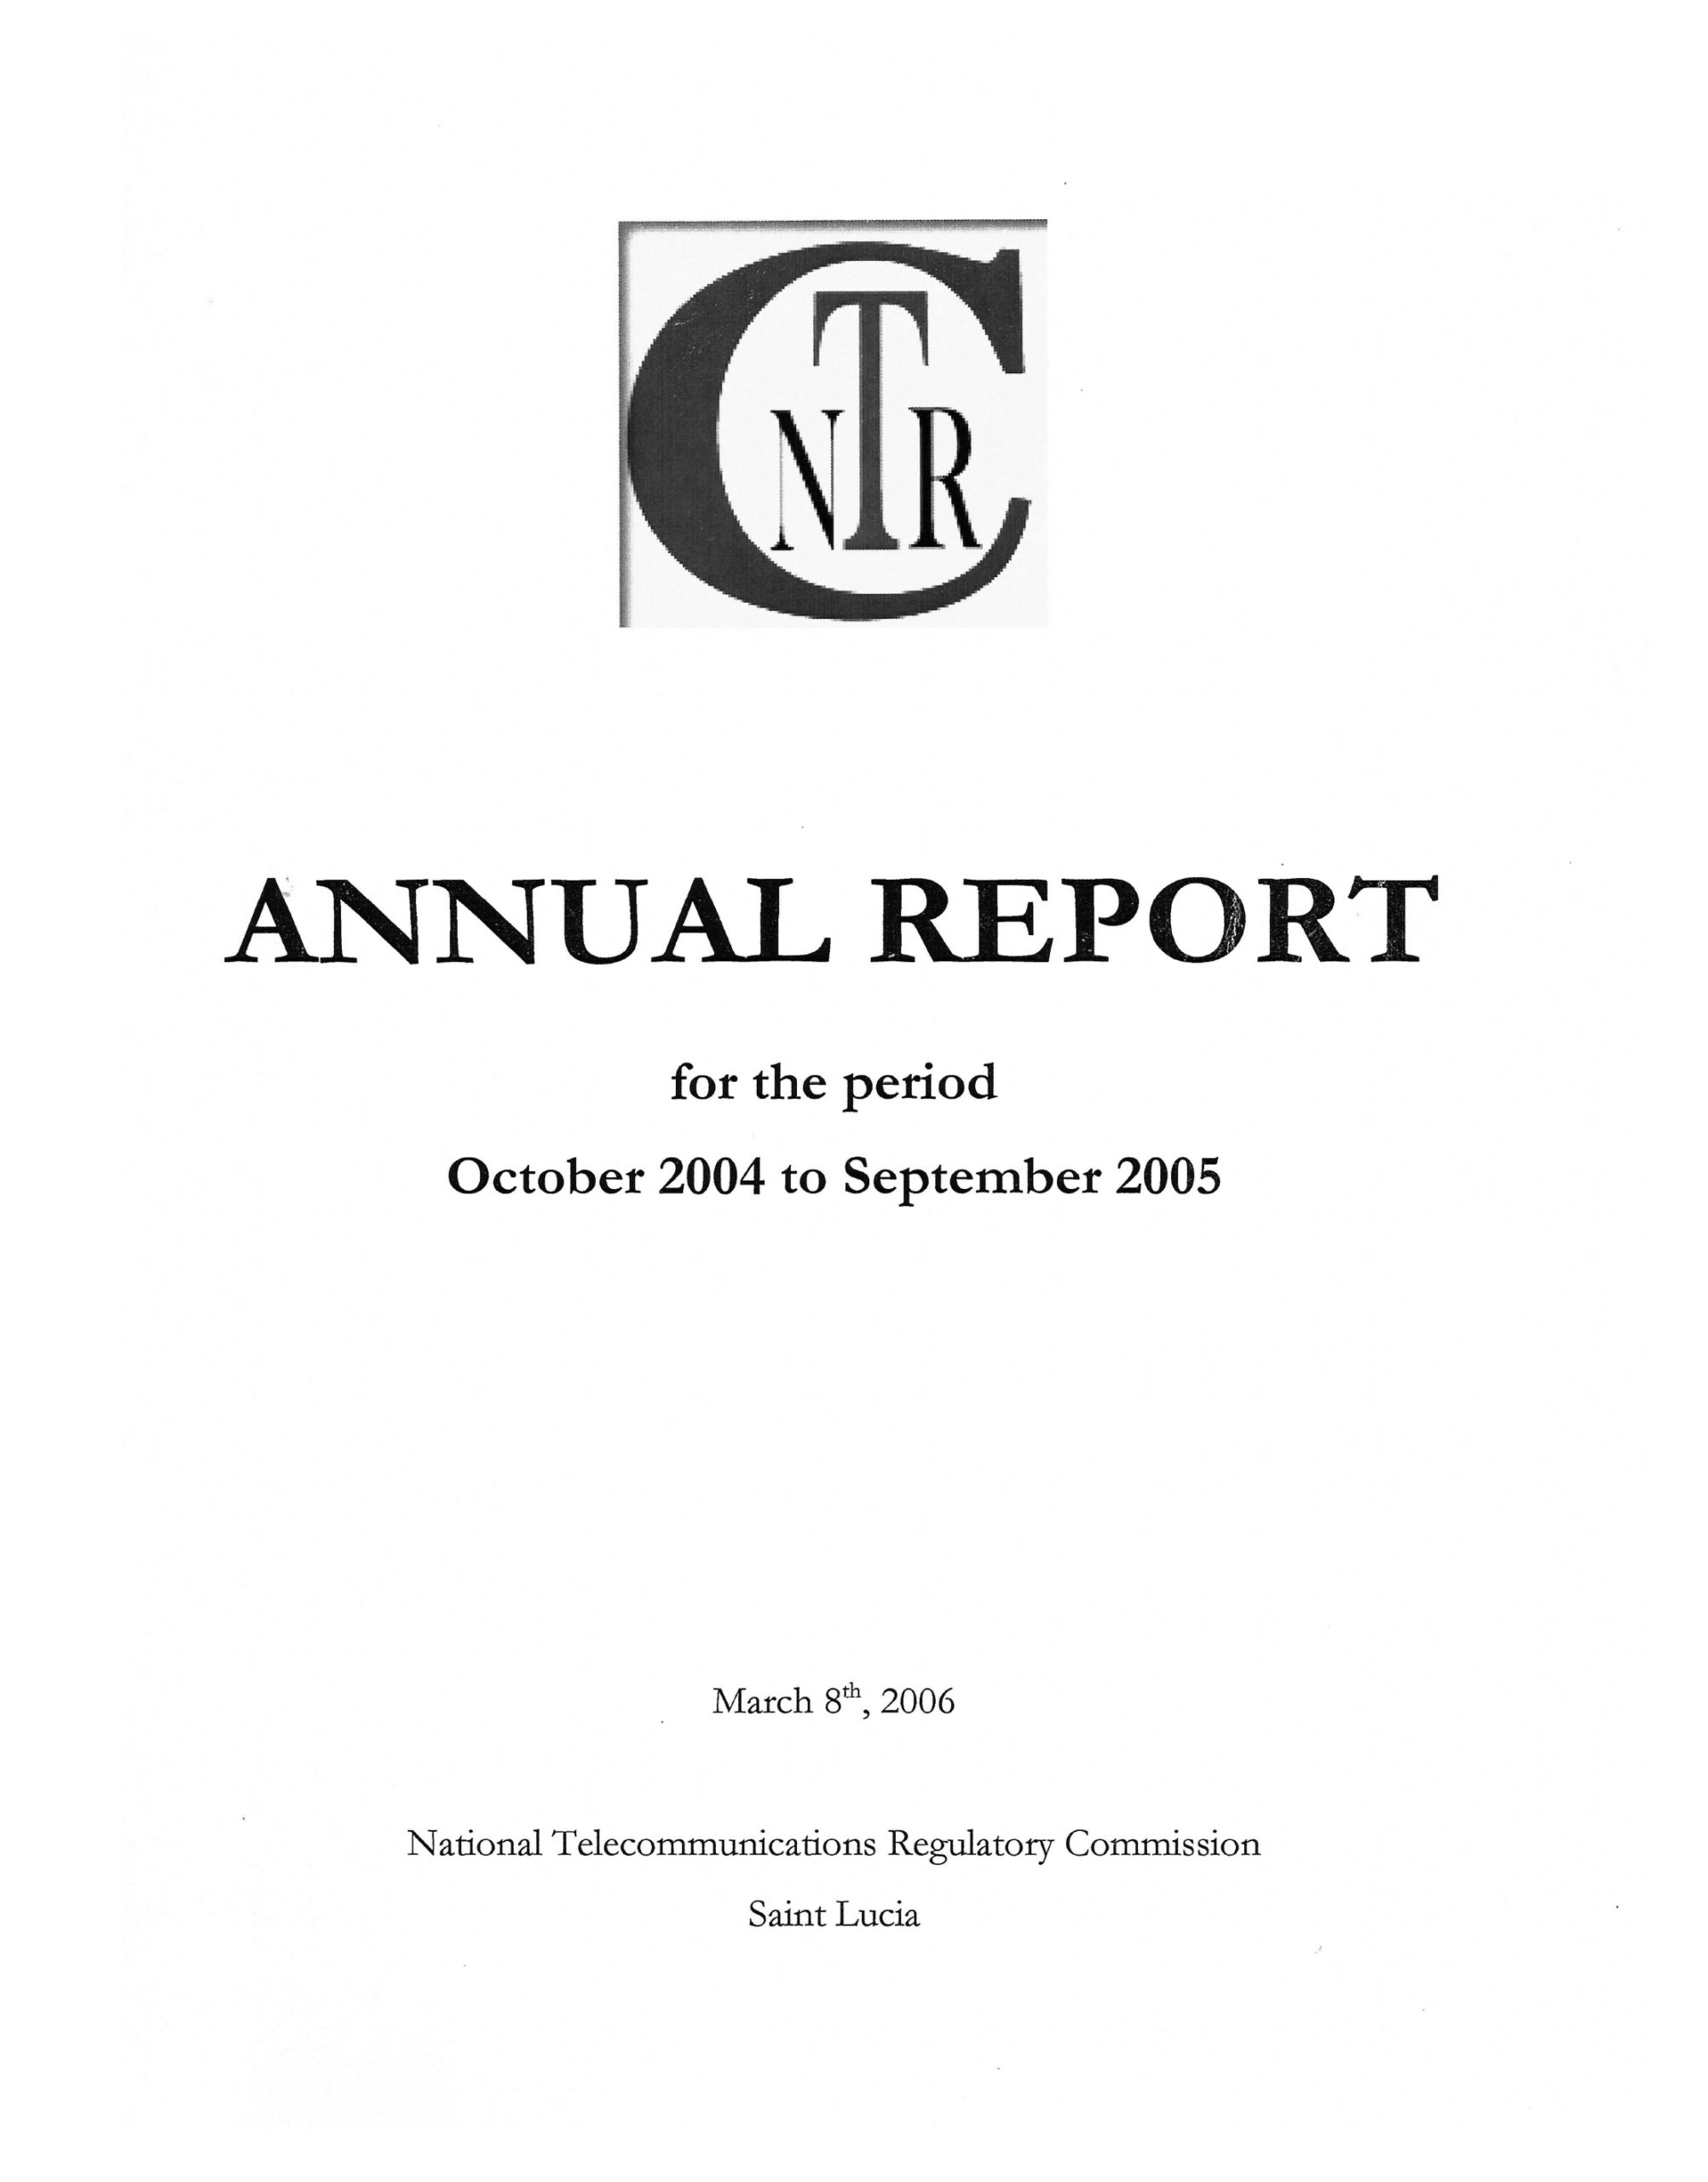 Annual Report Period October 2004 to September 2005